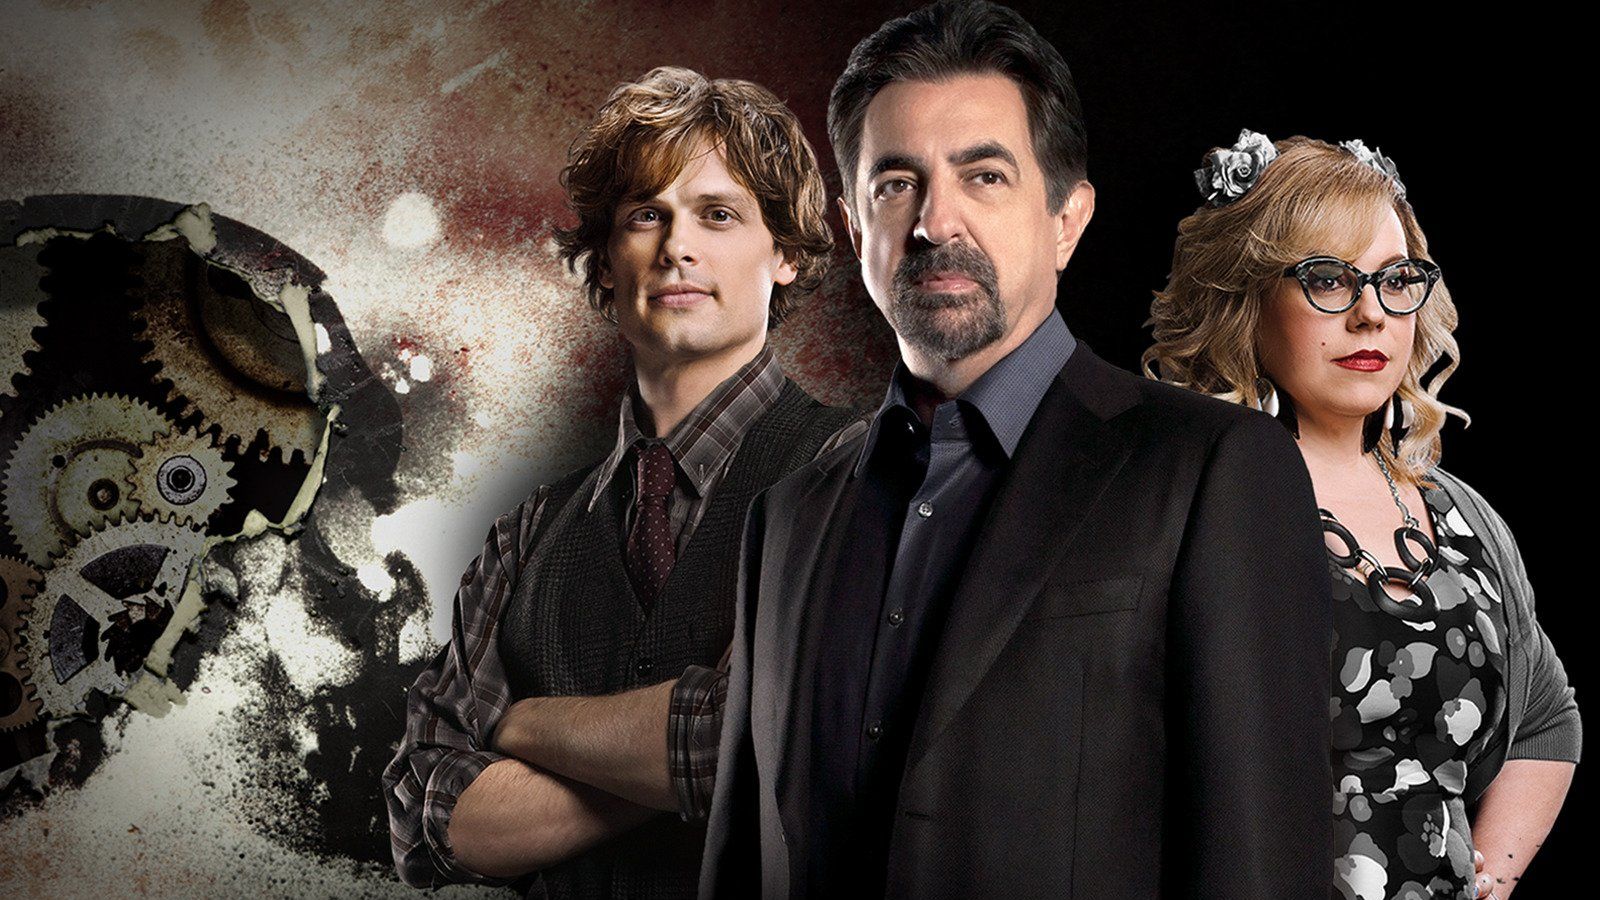 The Most Unforgettable Murders Ever on Criminal Minds